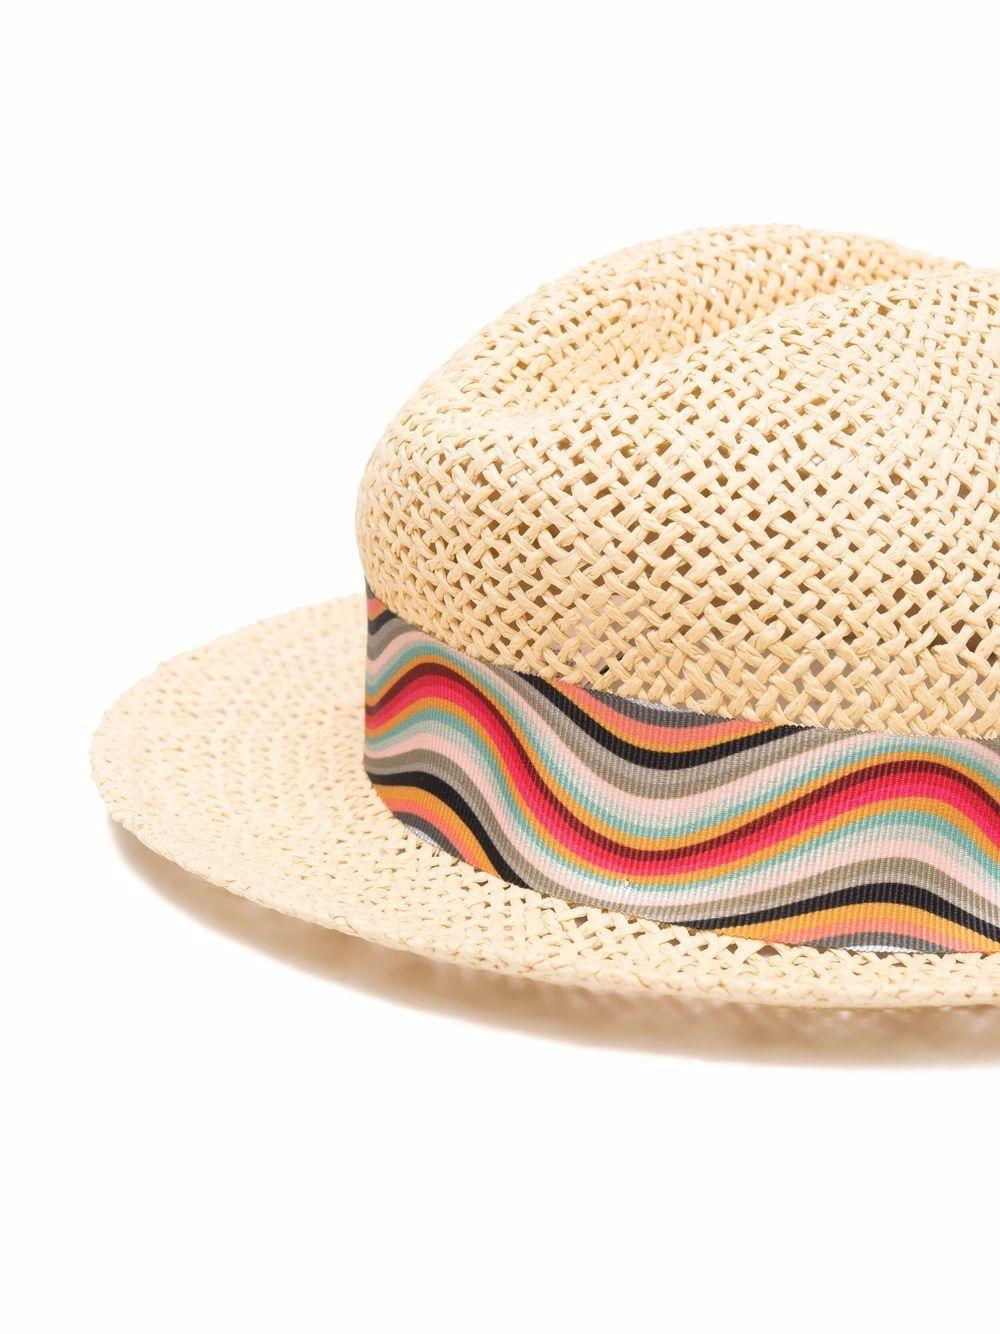 Paul Smith Hats Beige in Natural - Save 23% - Lyst